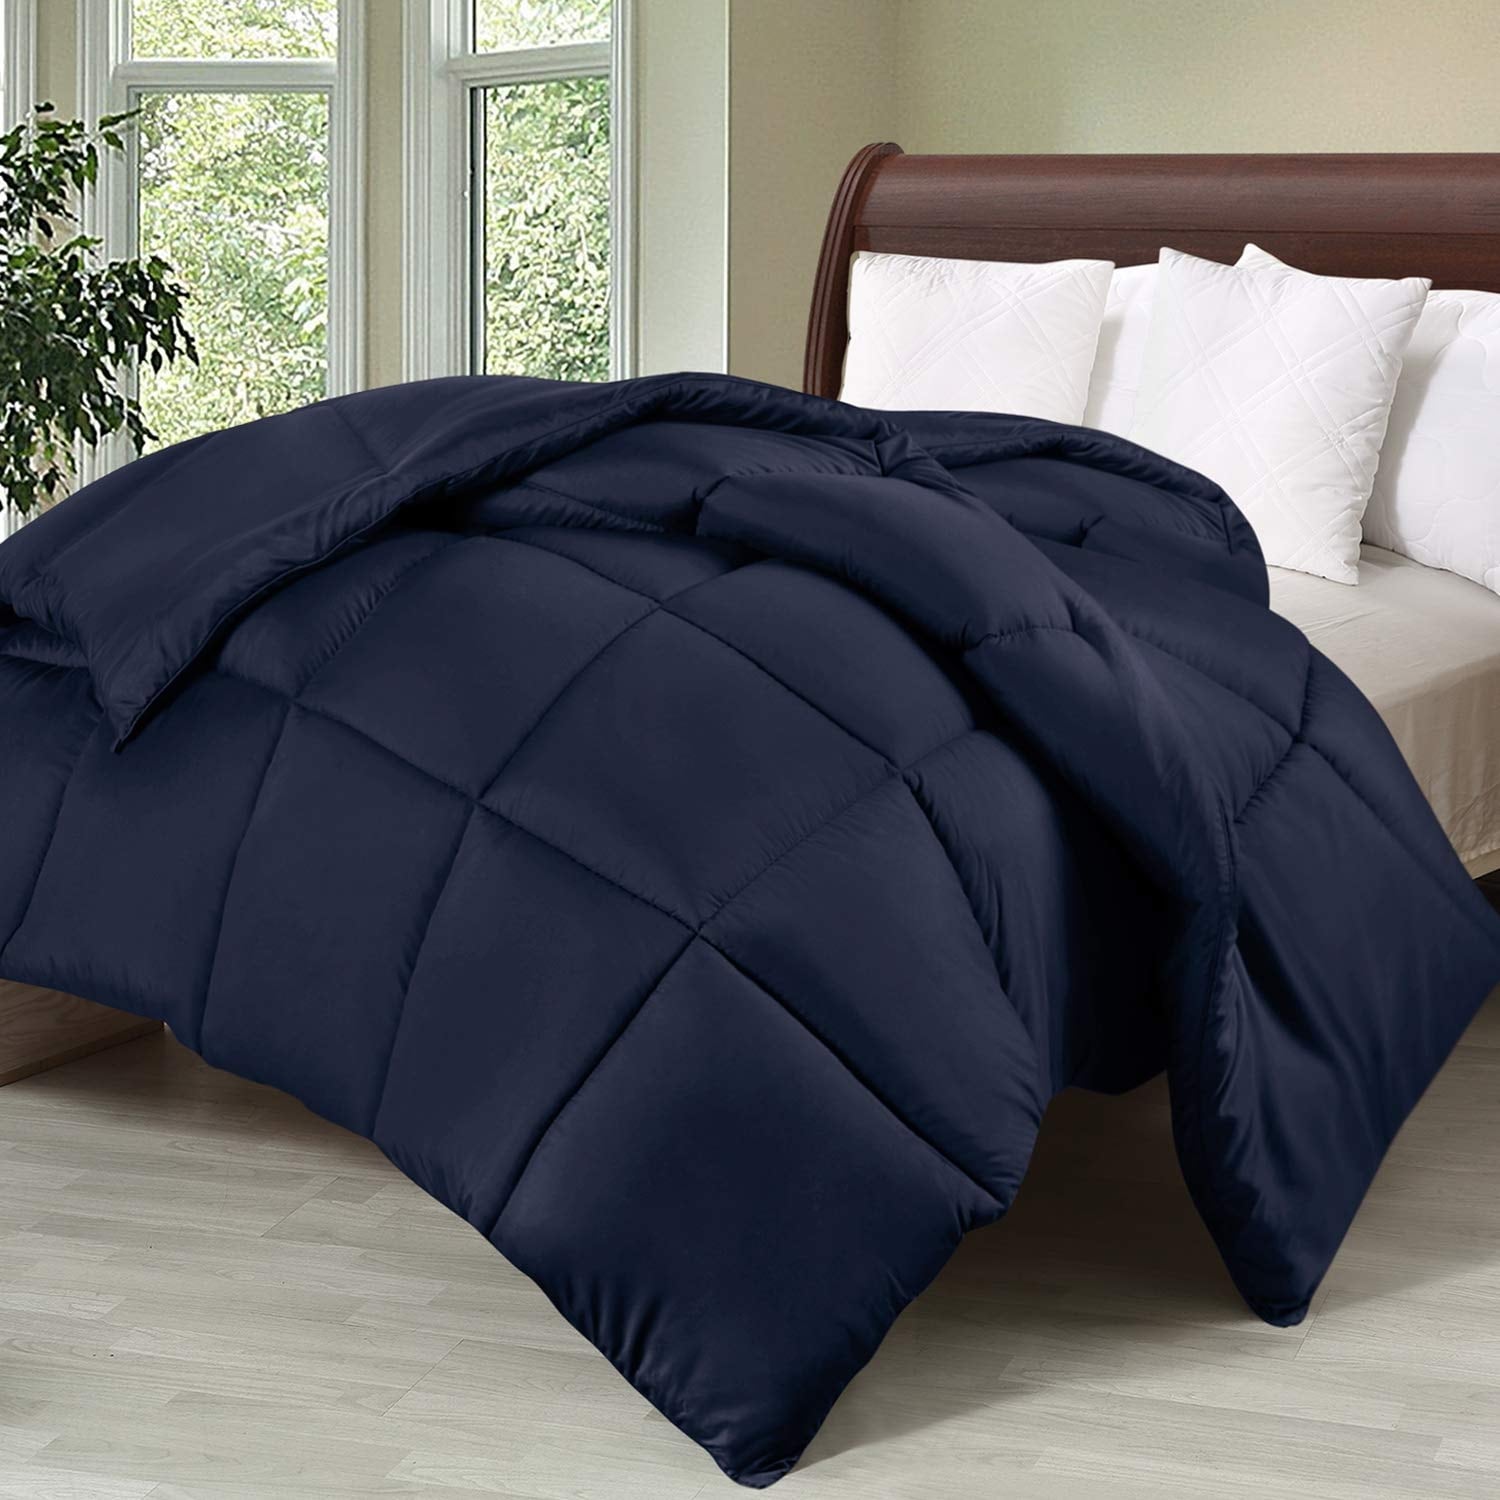 https://ak1.ostkcdn.com/images/products/is/images/direct/5980f159e68e312f520c41f8afde234bb08df60a/Utopia-Bedding-Comforter-Duvet-Insert-Quilted-Comforter-with-Corner-Tabs.jpg